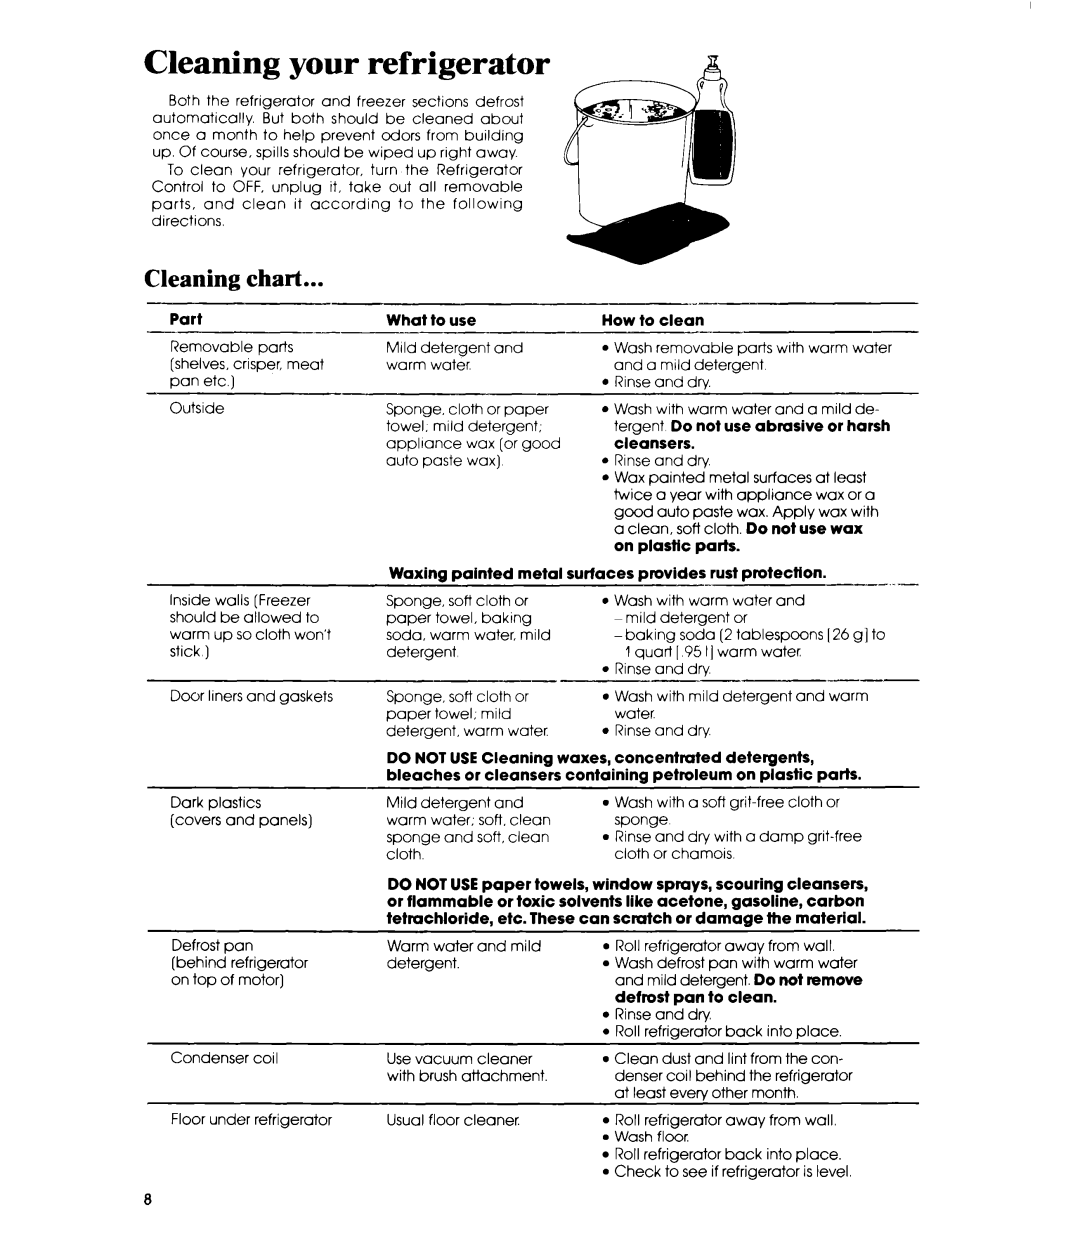 Whirlpool ETl8TK manual Cleaning your refrigerator, Cleaning chart, Part, What to use, Waxing painted metal 